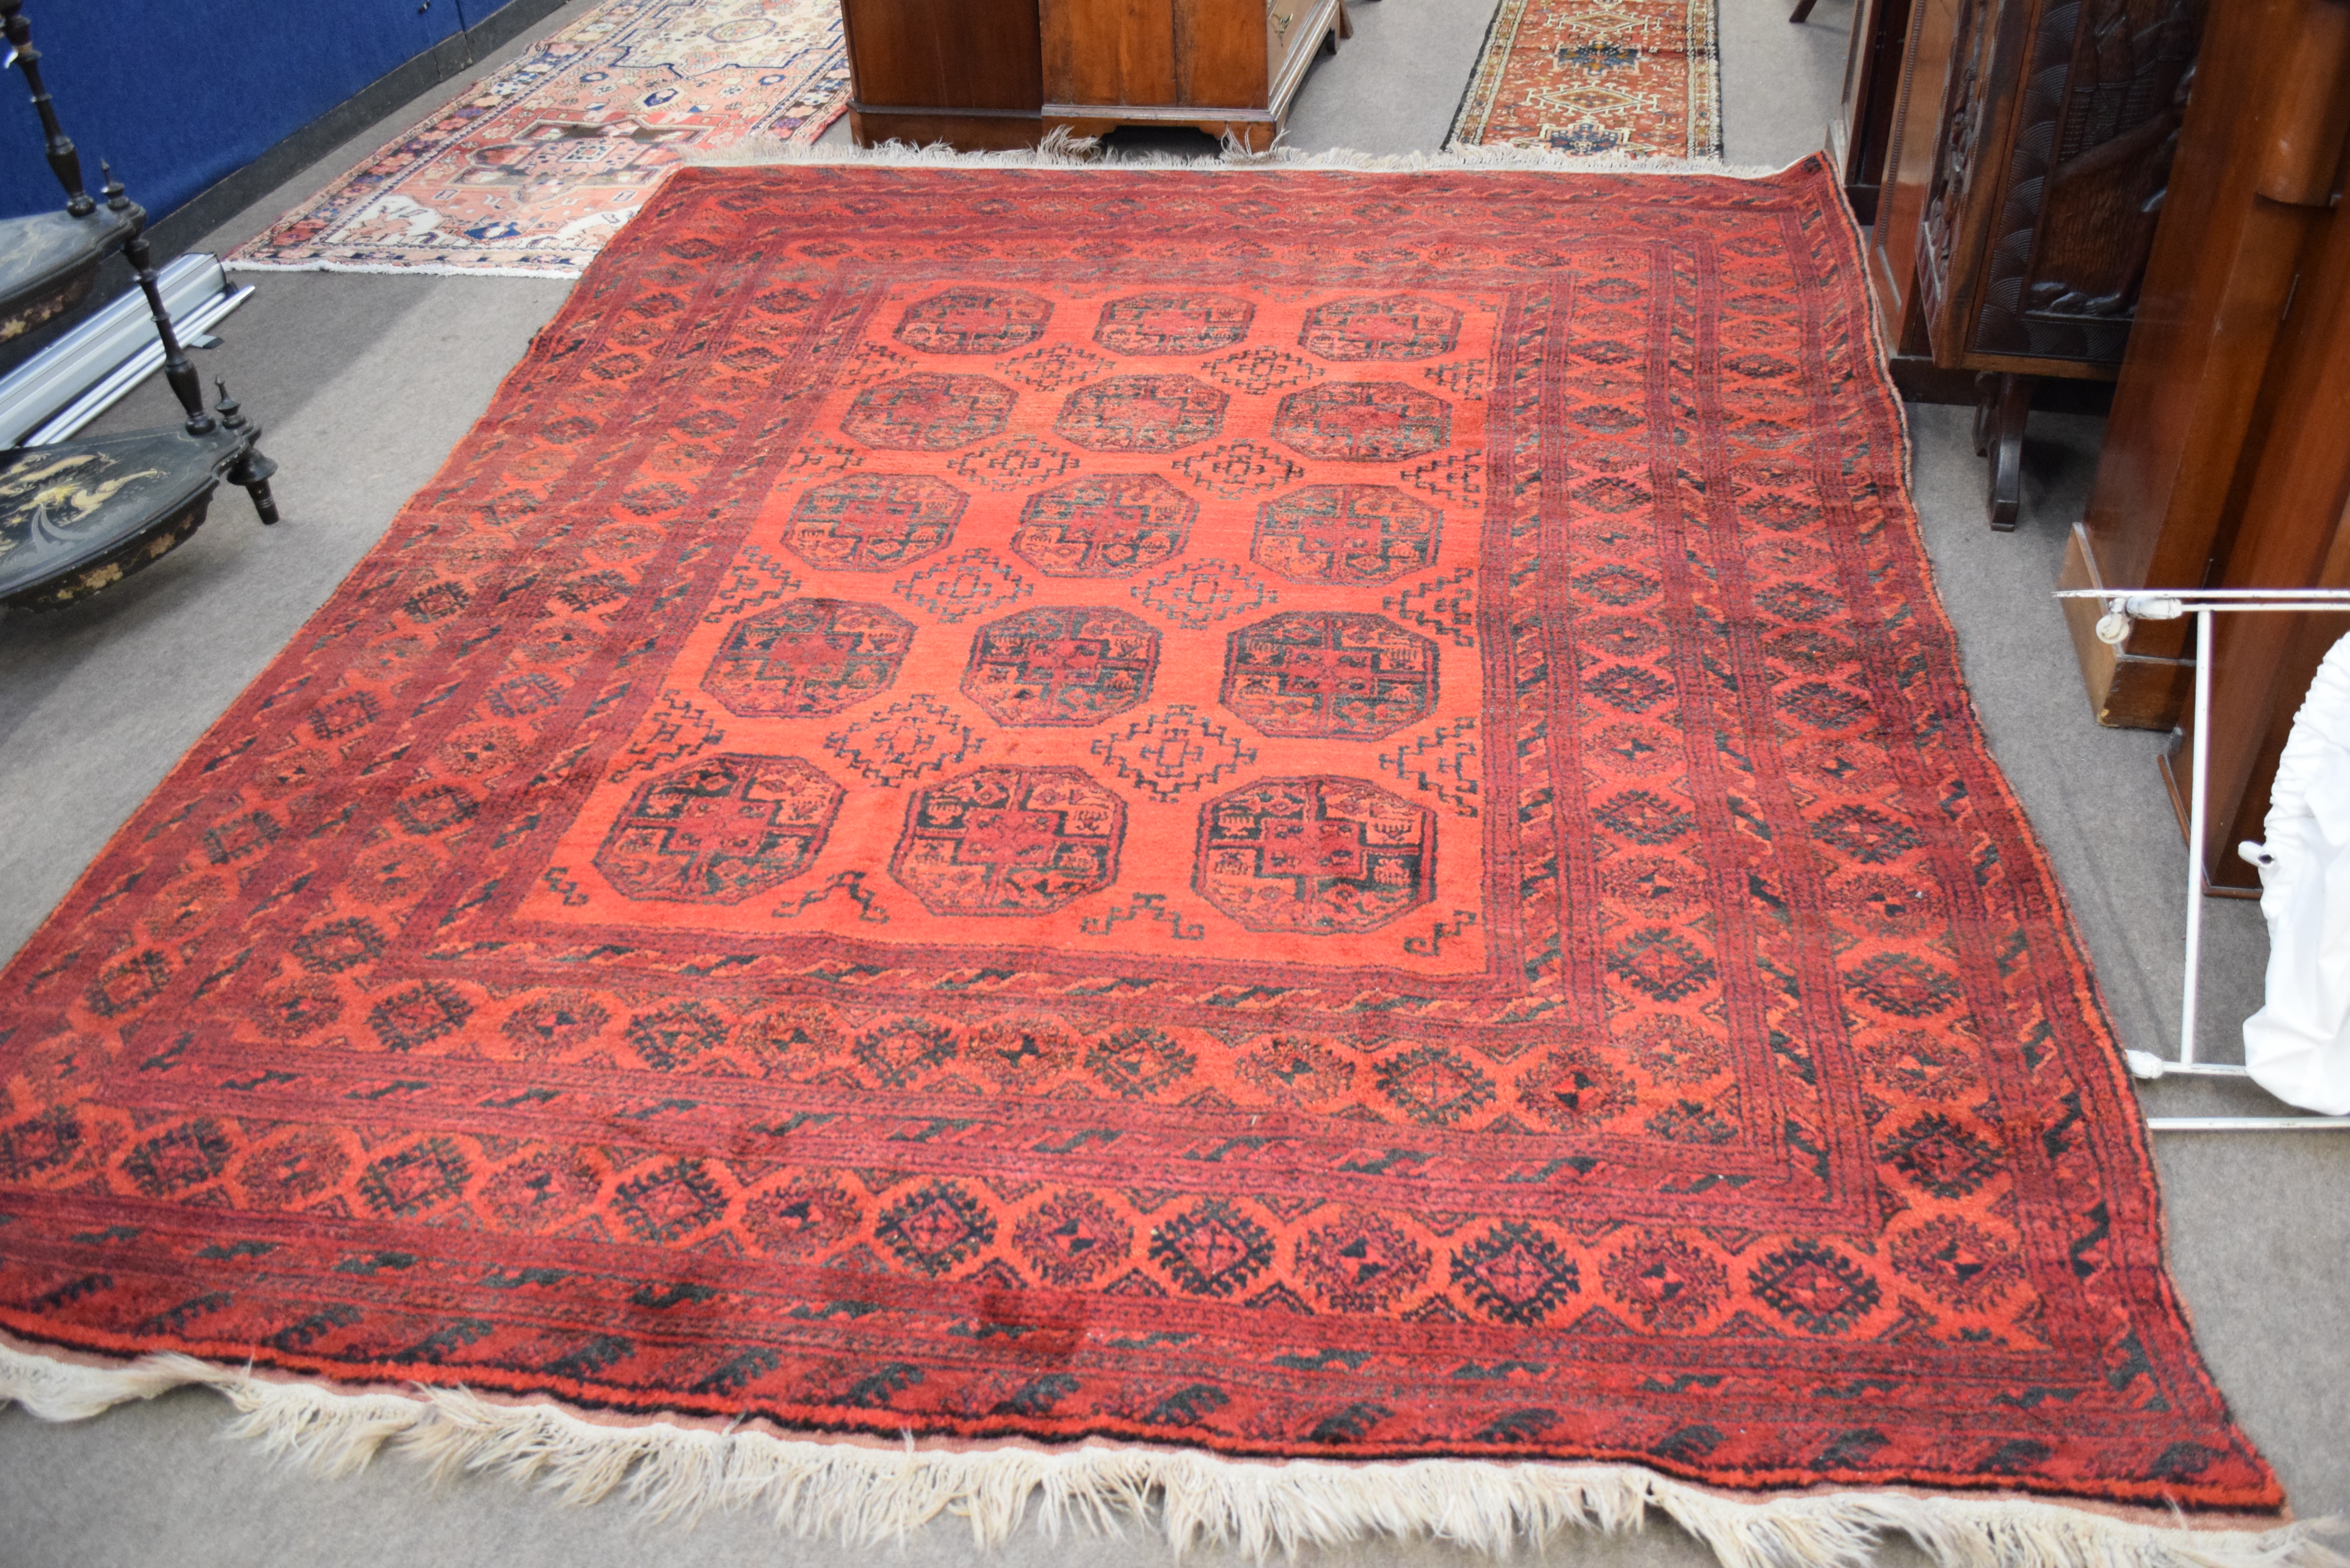 Large 20th century Bokhara type floor rug decorated with lozenges on a red background with a